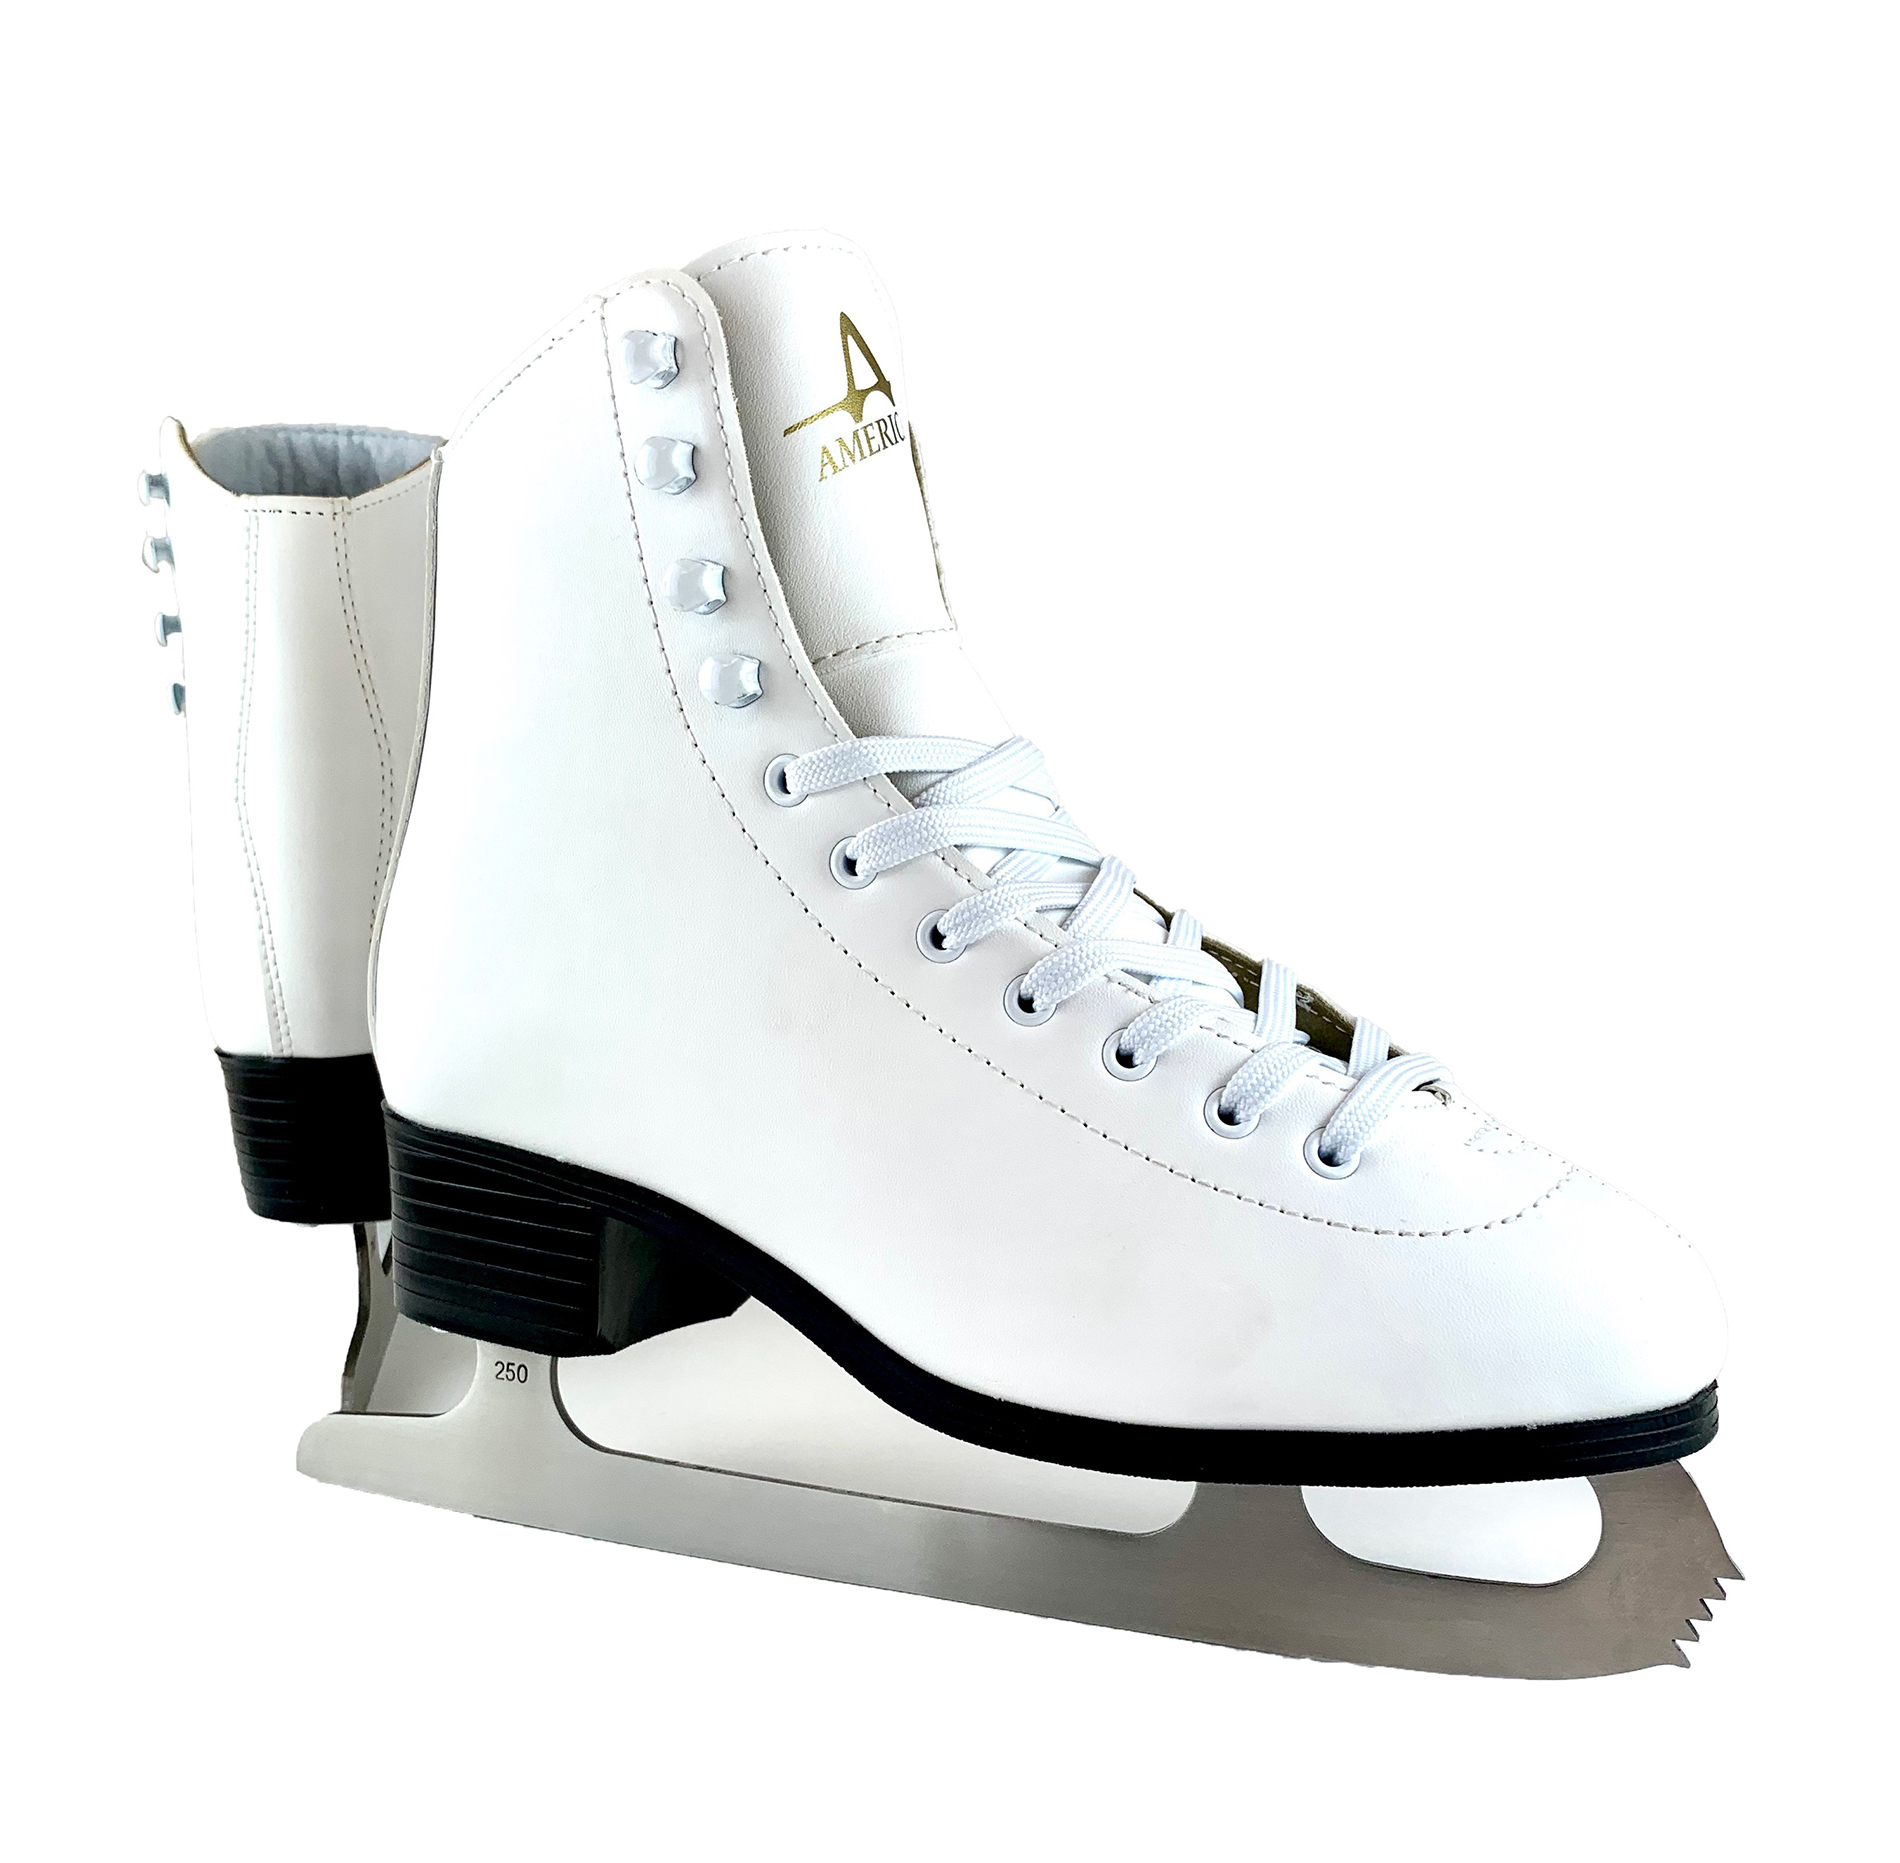 American Athletic Women's Tricot-Lined Ice Skates, Size 8 - image 1 of 5